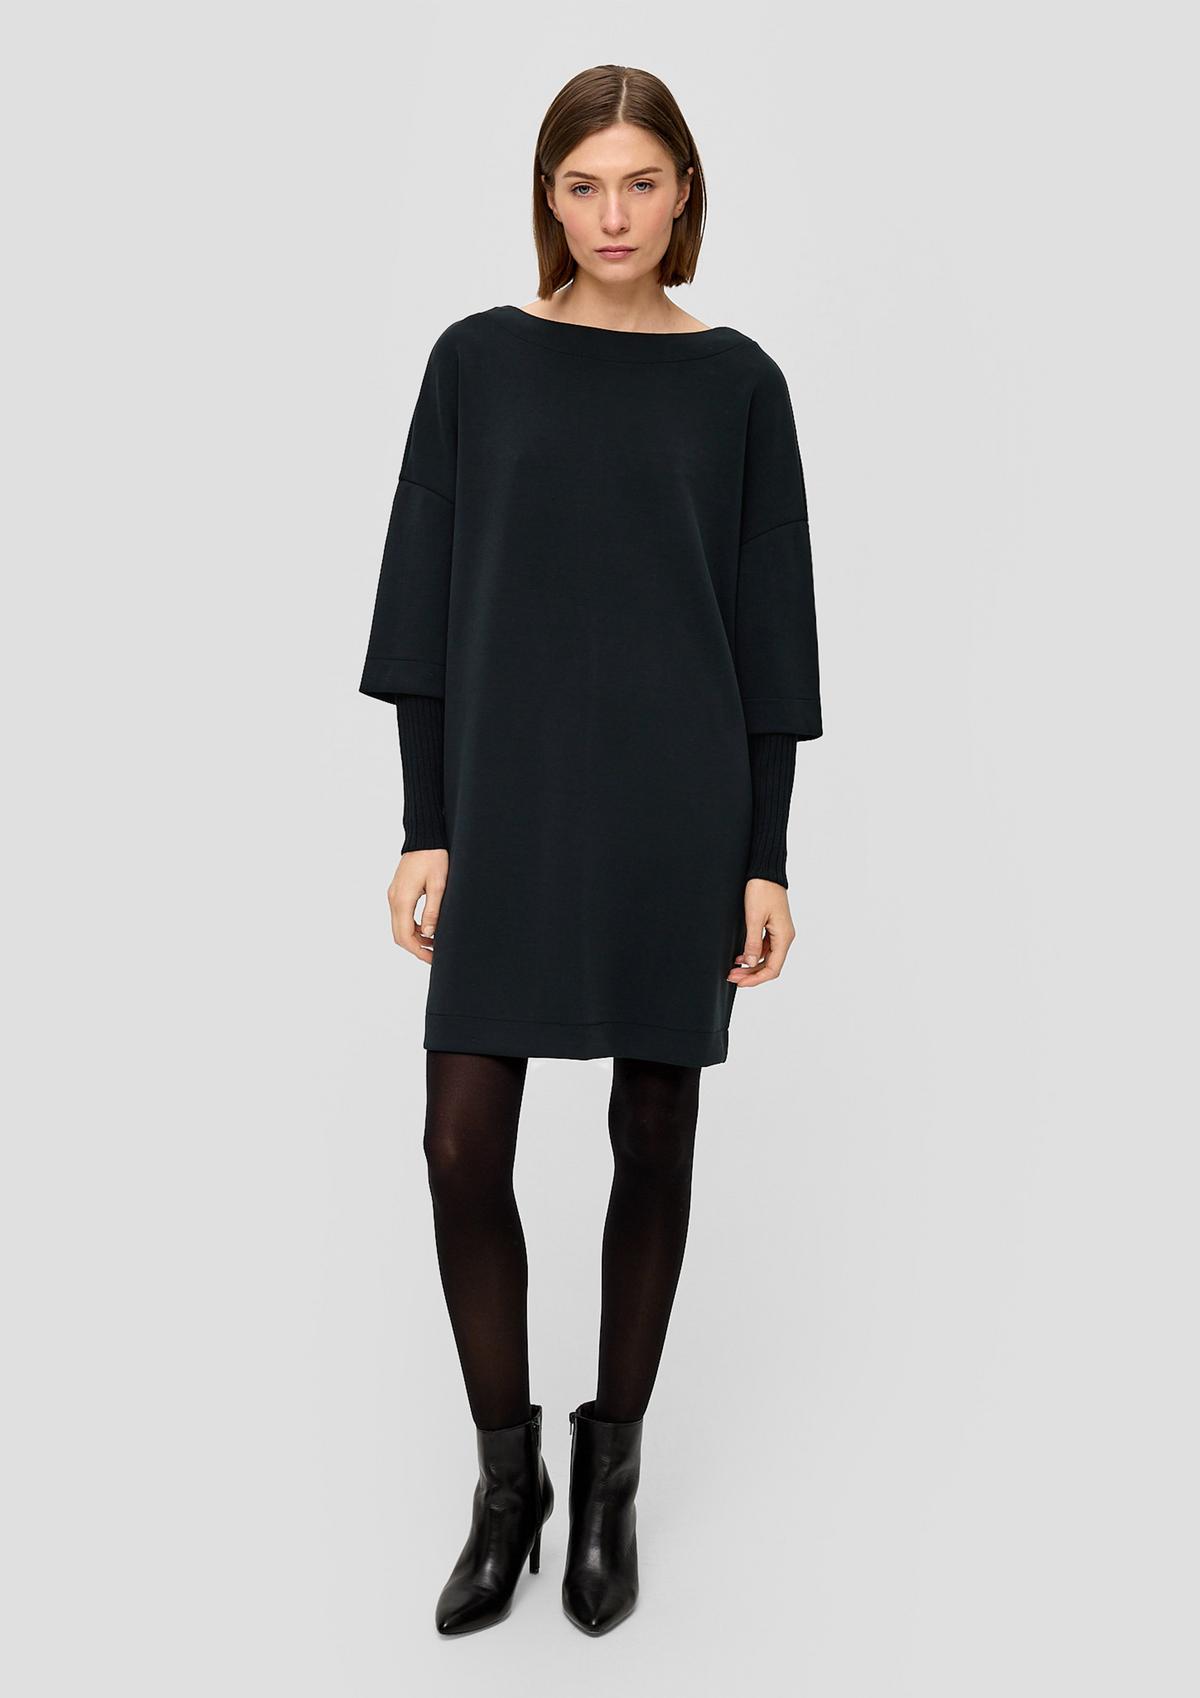 s.Oliver Loosely cut dress made of scuba sweatshirt fabric